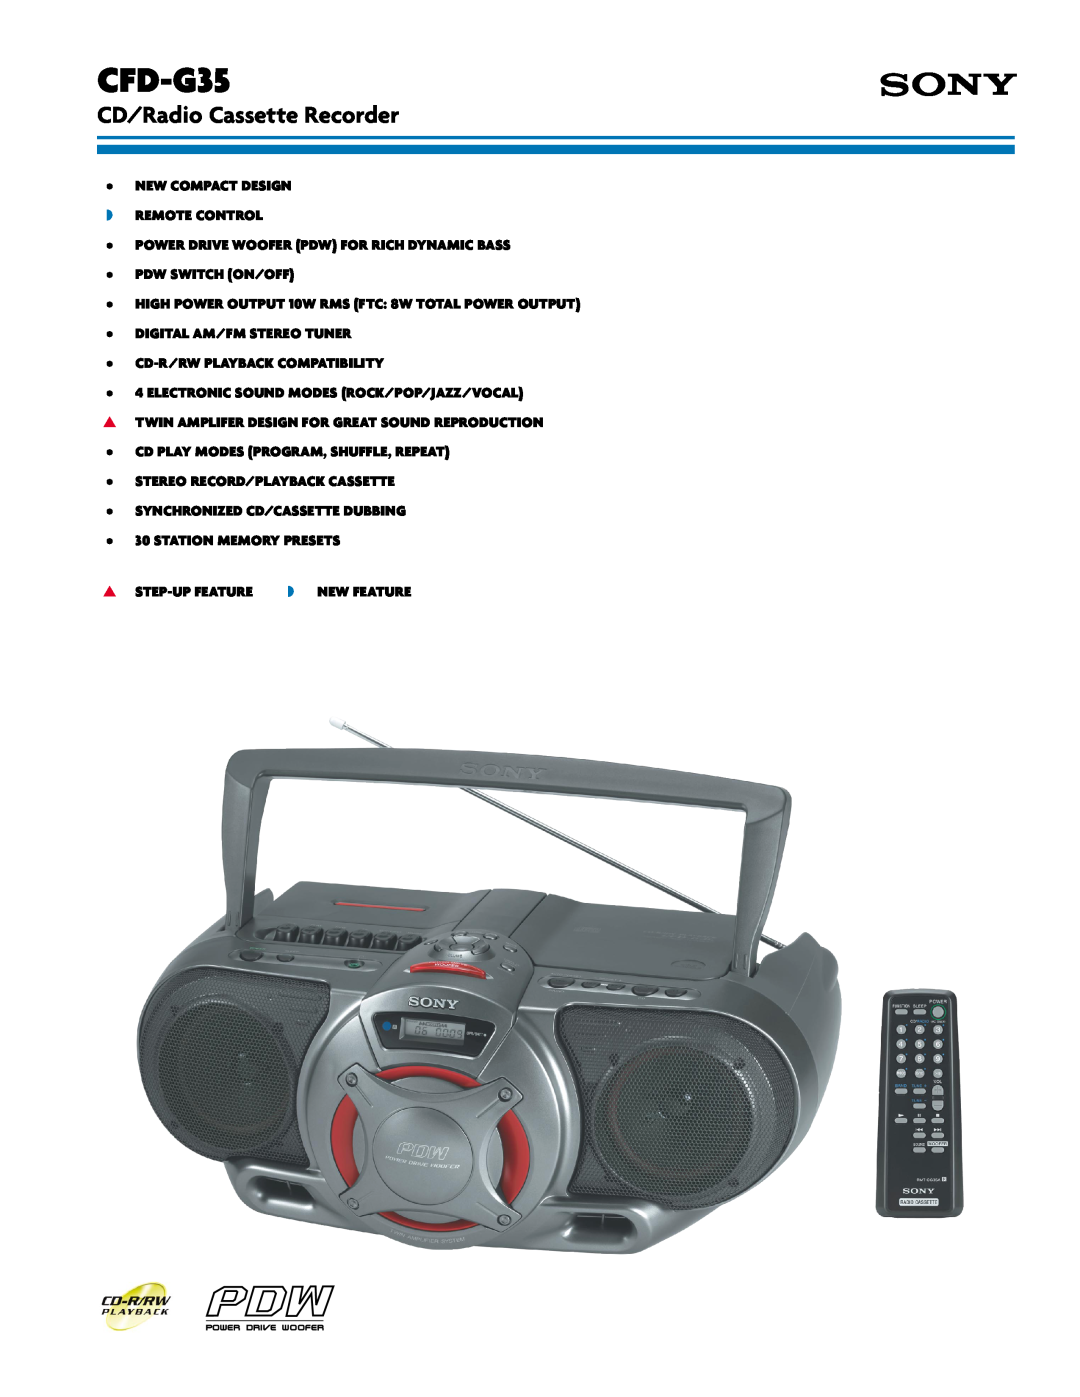 Sony 313, Portable CD Player manual CFD-G35, CD/Radio Cassette Recorder 